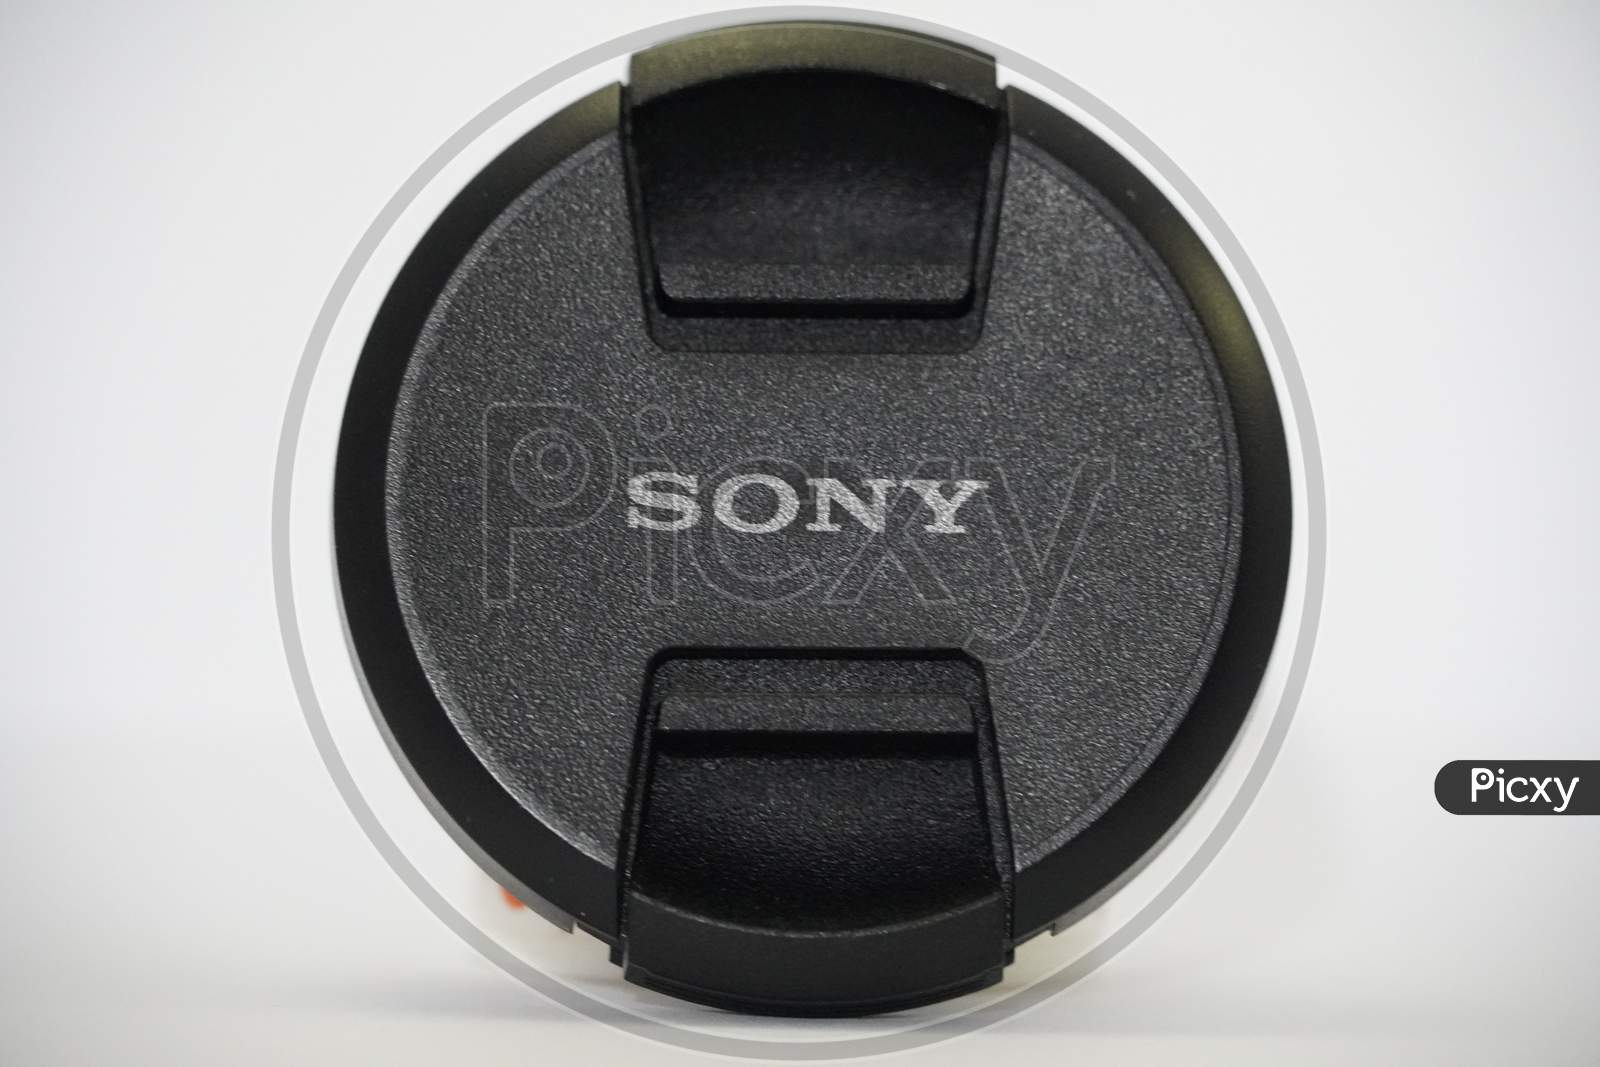 Sony Camera Lens Cap On White Background. Branded Cap Of Camera Lens Named Sony As Accessories For Those Whose Hobby In Photography. : Udaipur India - March 2020